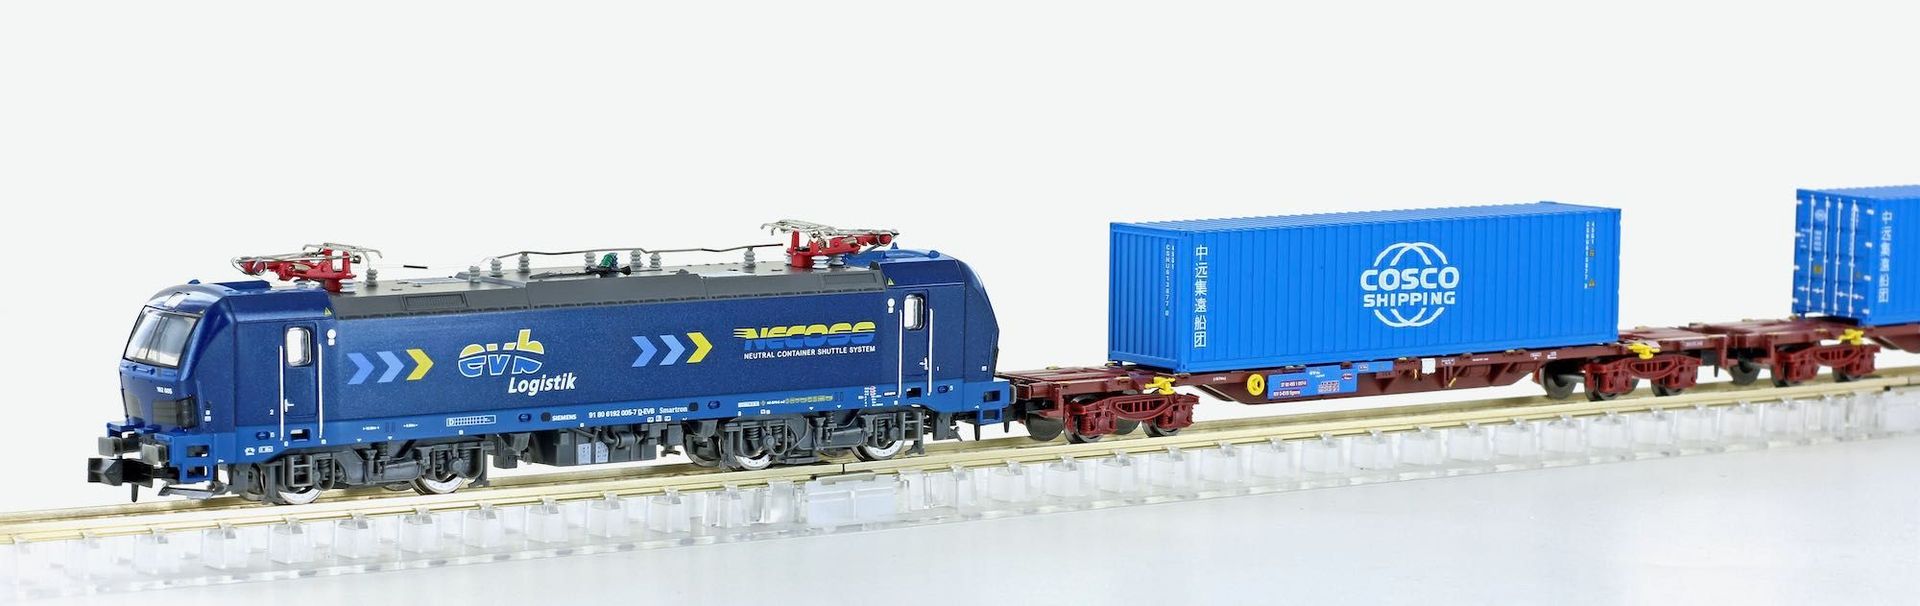 Lemke Collection 96004S - Container-Zug mit E-Lok BR 192 005 Smartron N 1:160 Sound